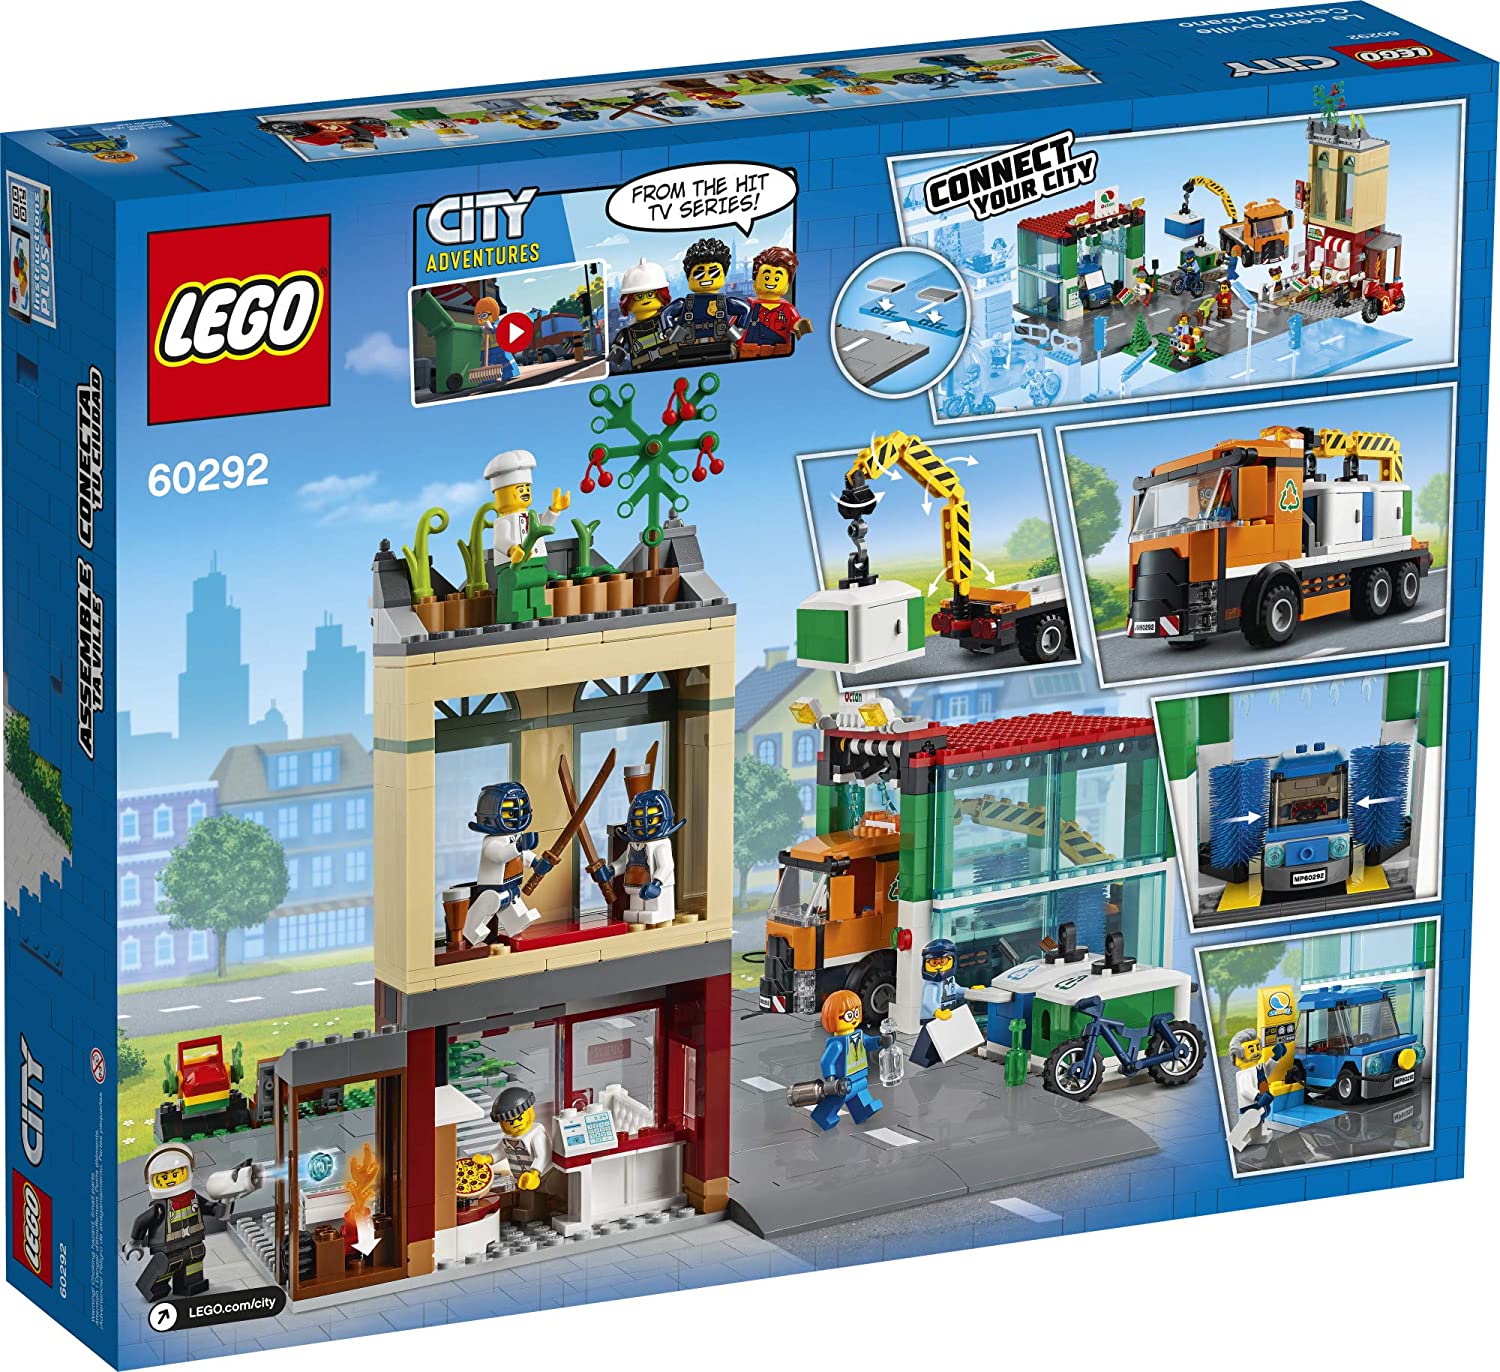 Lego City Town Center Cool Building Toy for Kids, 790 Pieces, -- ANB Baby